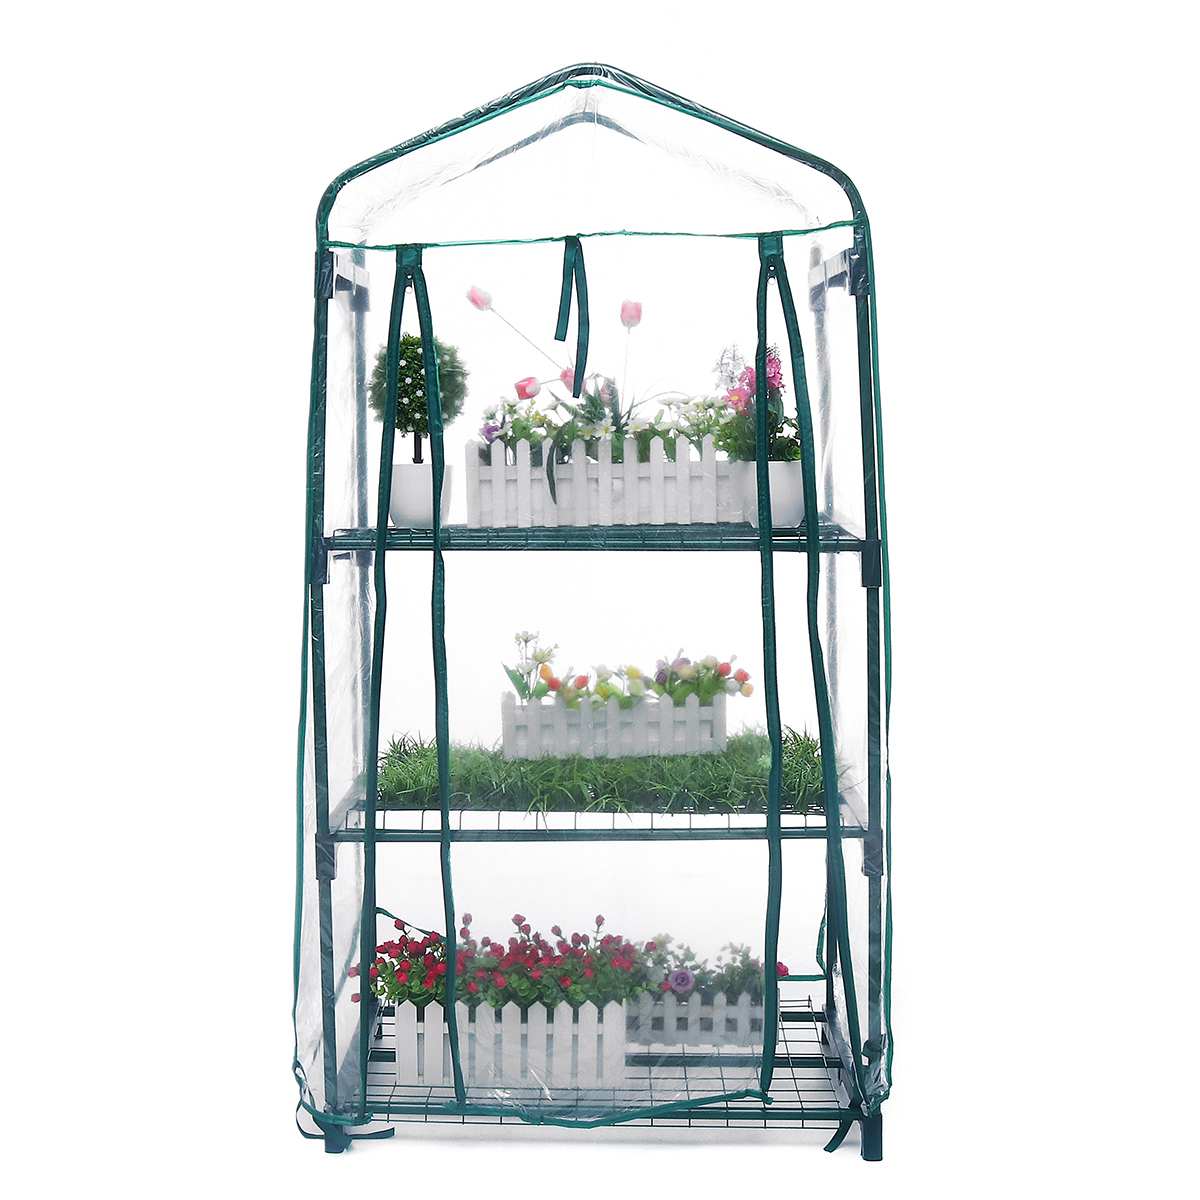 Mini Garden Greenhouse 3 Layers Home Outdoor Flowers Gardening Winter Plant Shelves Vegetables Warm Room Shelter 69x49x126cm